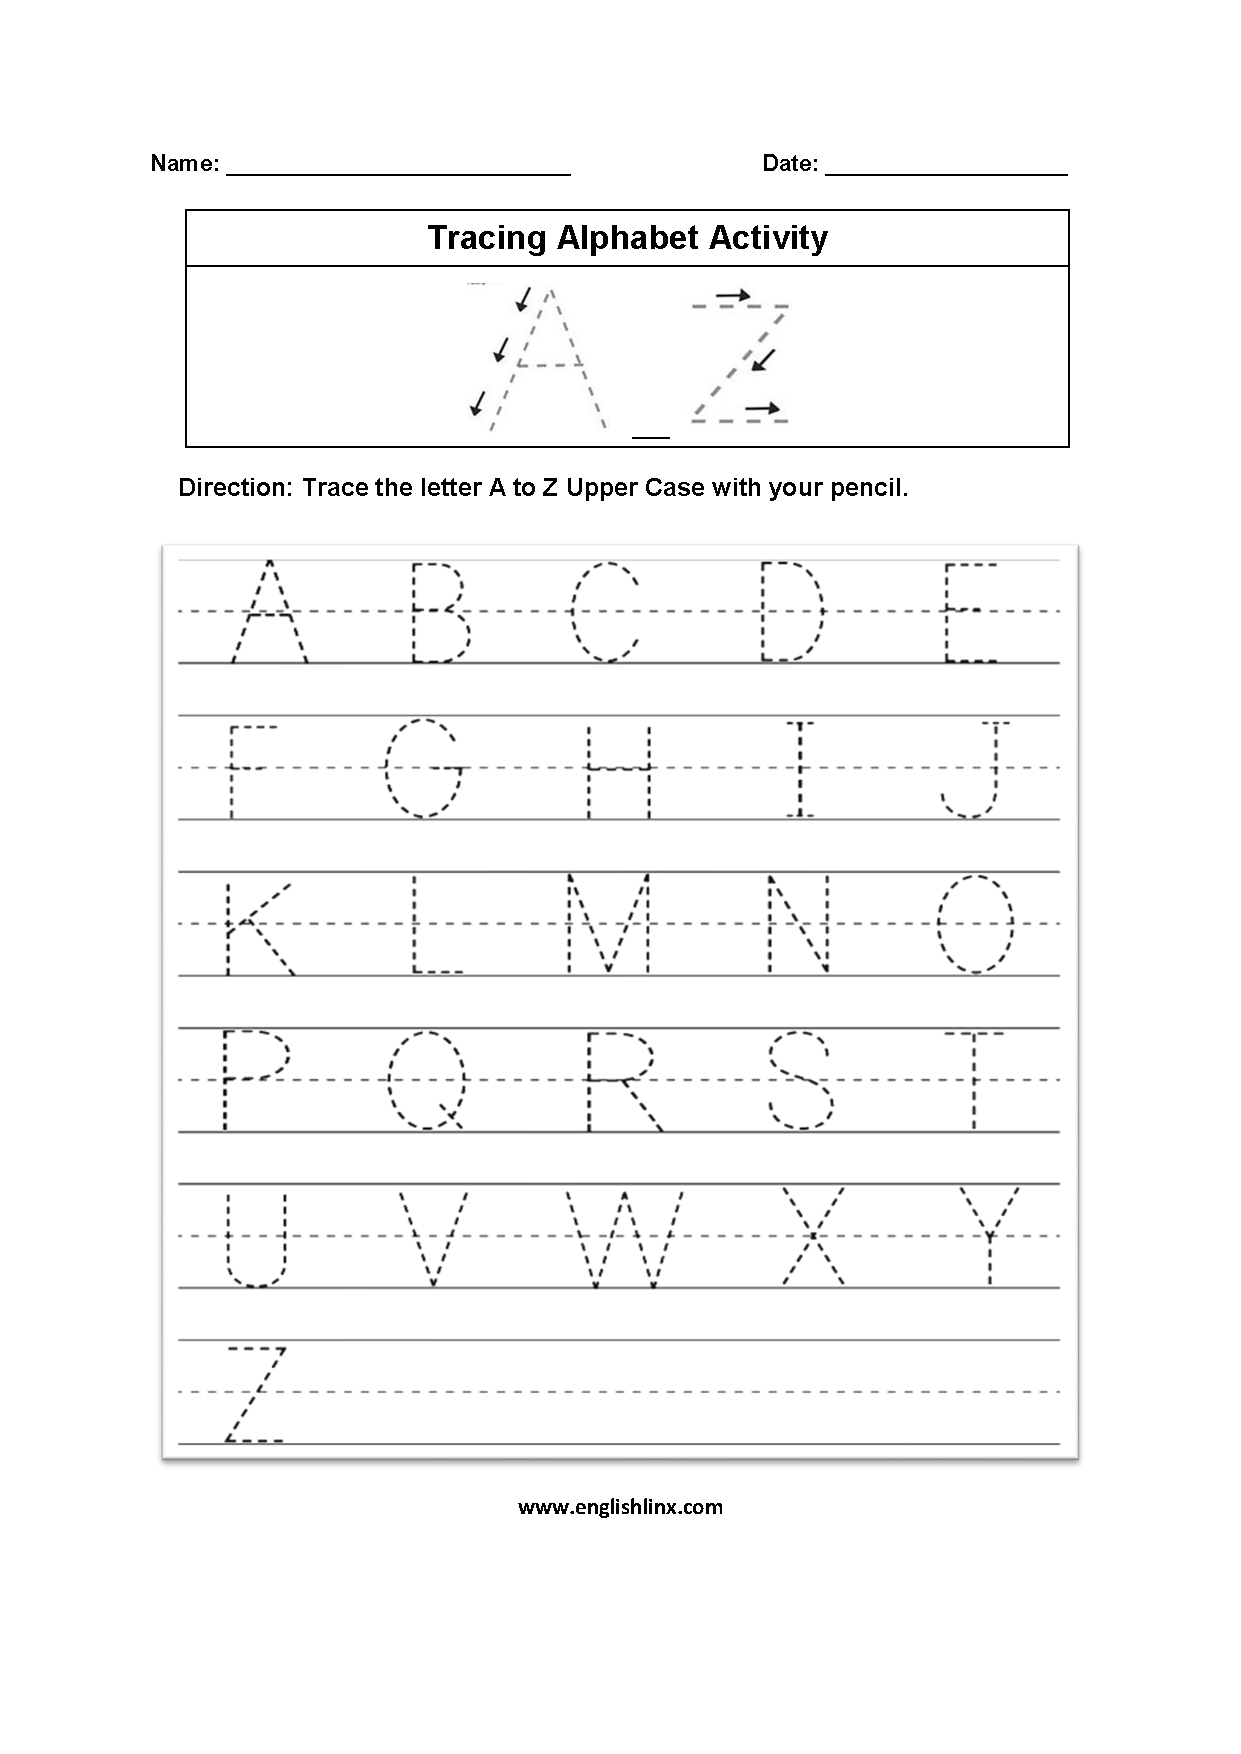 A To Z Tracing Worksheets Pdf Handwriting Practice Numbers 1 with A-Z Alphabet Worksheets